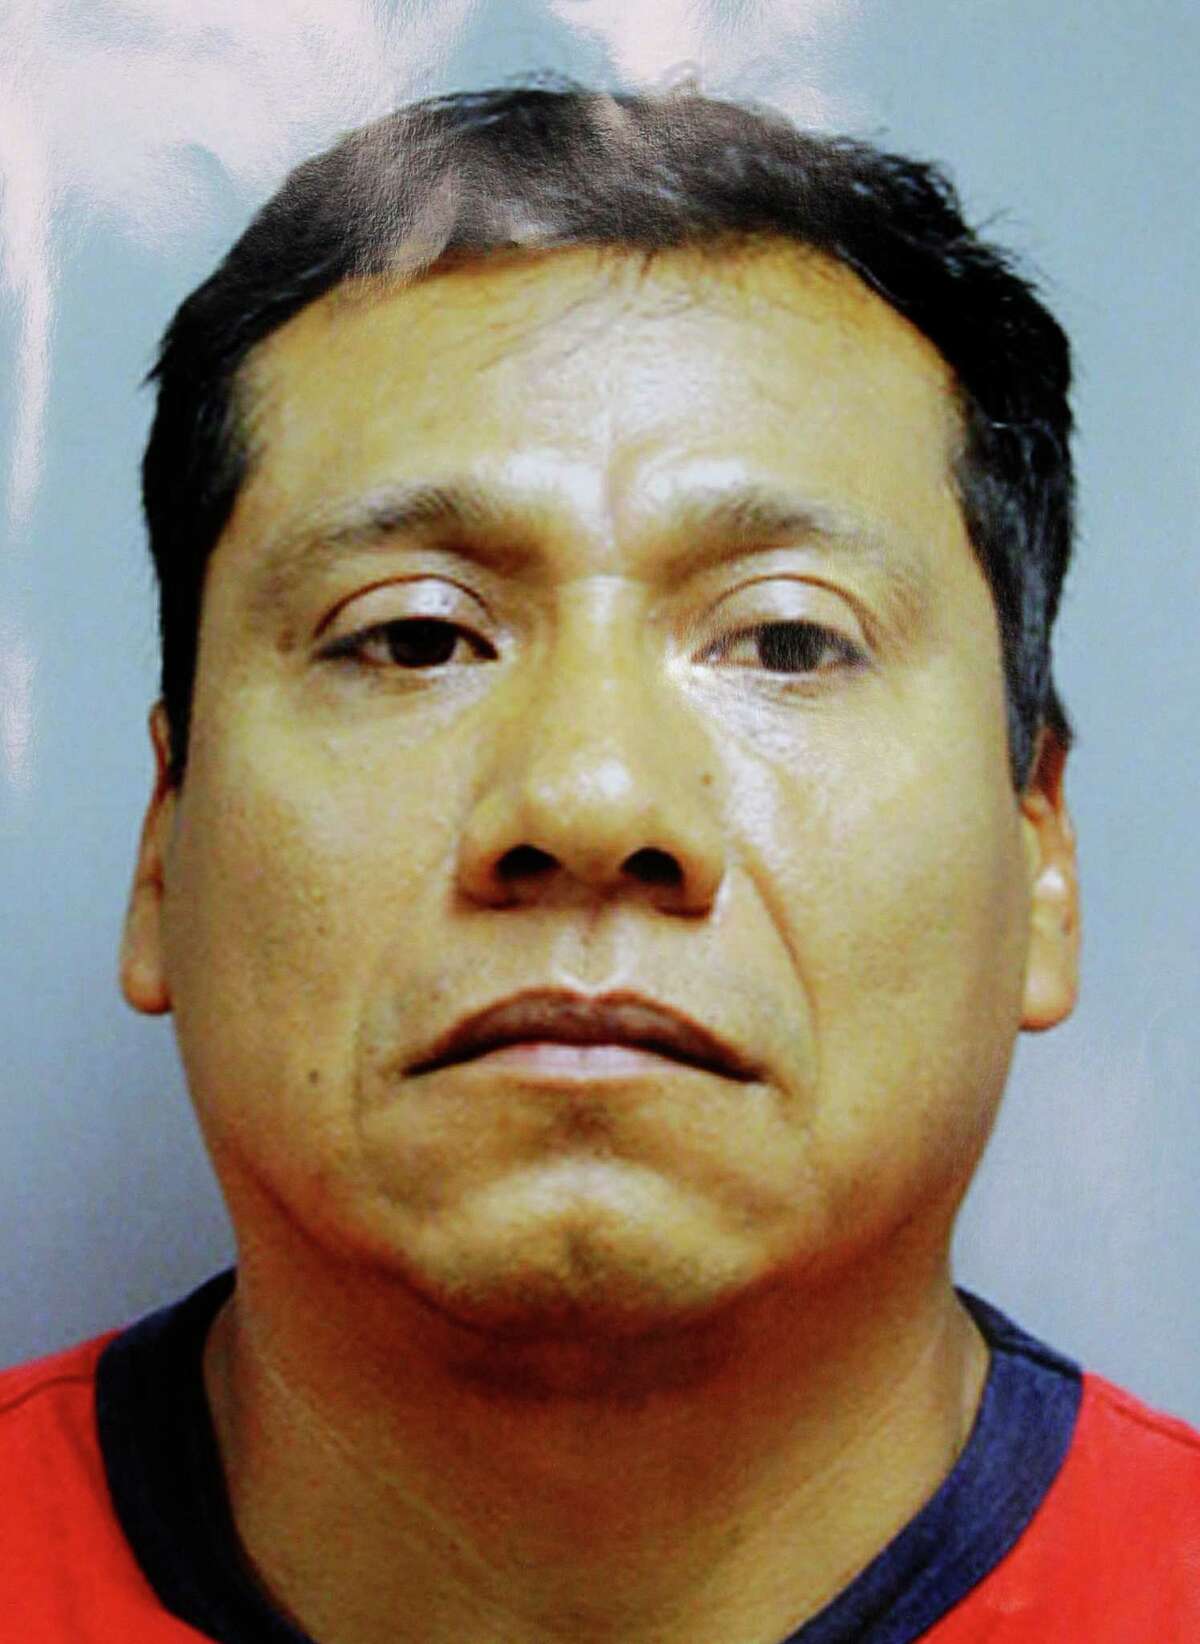 Copy of handout photo from FBI of fugitive Alfonso Diaz-Juarez, aka "Poncho" shown during media conference at FBI Houston Headquarters, 1 Justice Park Drive, Friday, Oct. 11, 2013, in Houston. The multi-agency media conference was held to announce multiple federal arrests, and to seek public assistance in the ongoing investigation of an international sex-trafficking ring in which 14 have been charged. Twelve victims were recovered including five minors. ( Melissa Phillip / Houston Chronicle )